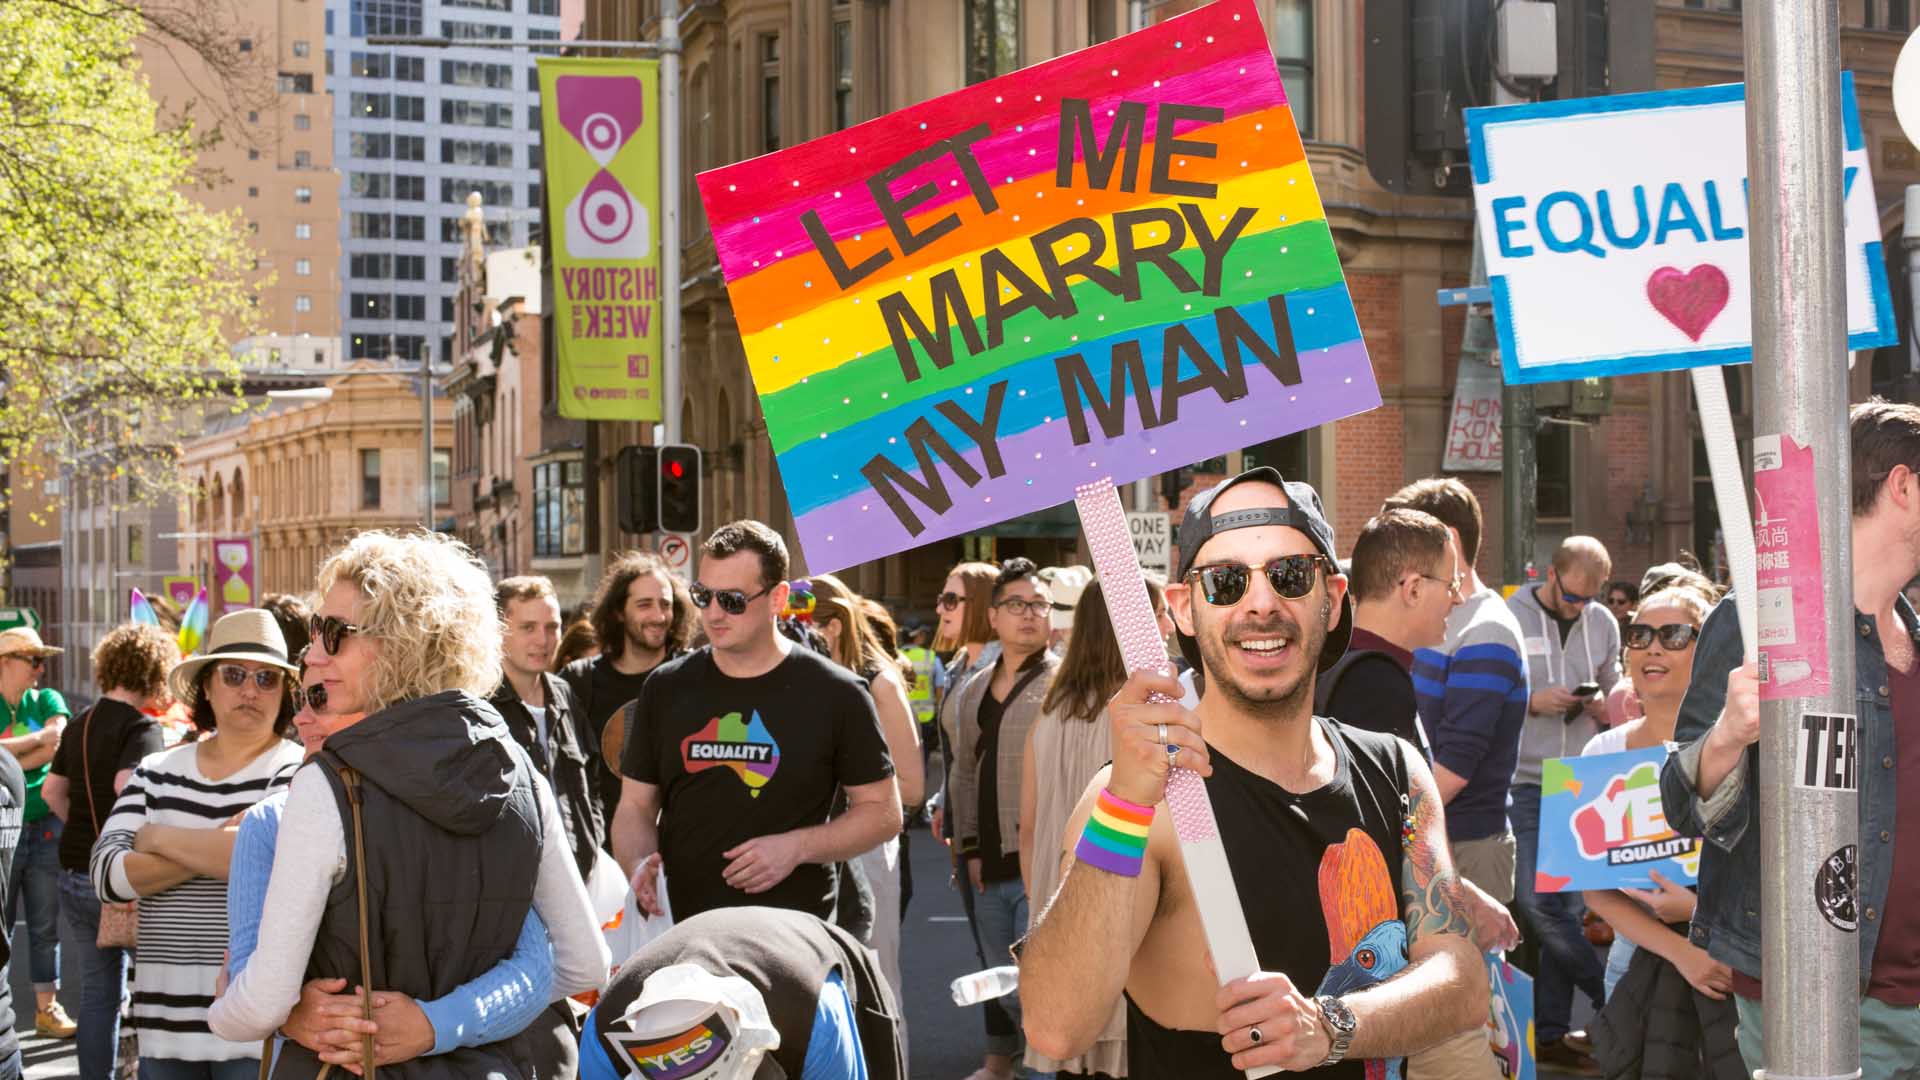 The City of Sydney Will Waive Its Wedding Venue Hire Fees for Same-Sex Couples